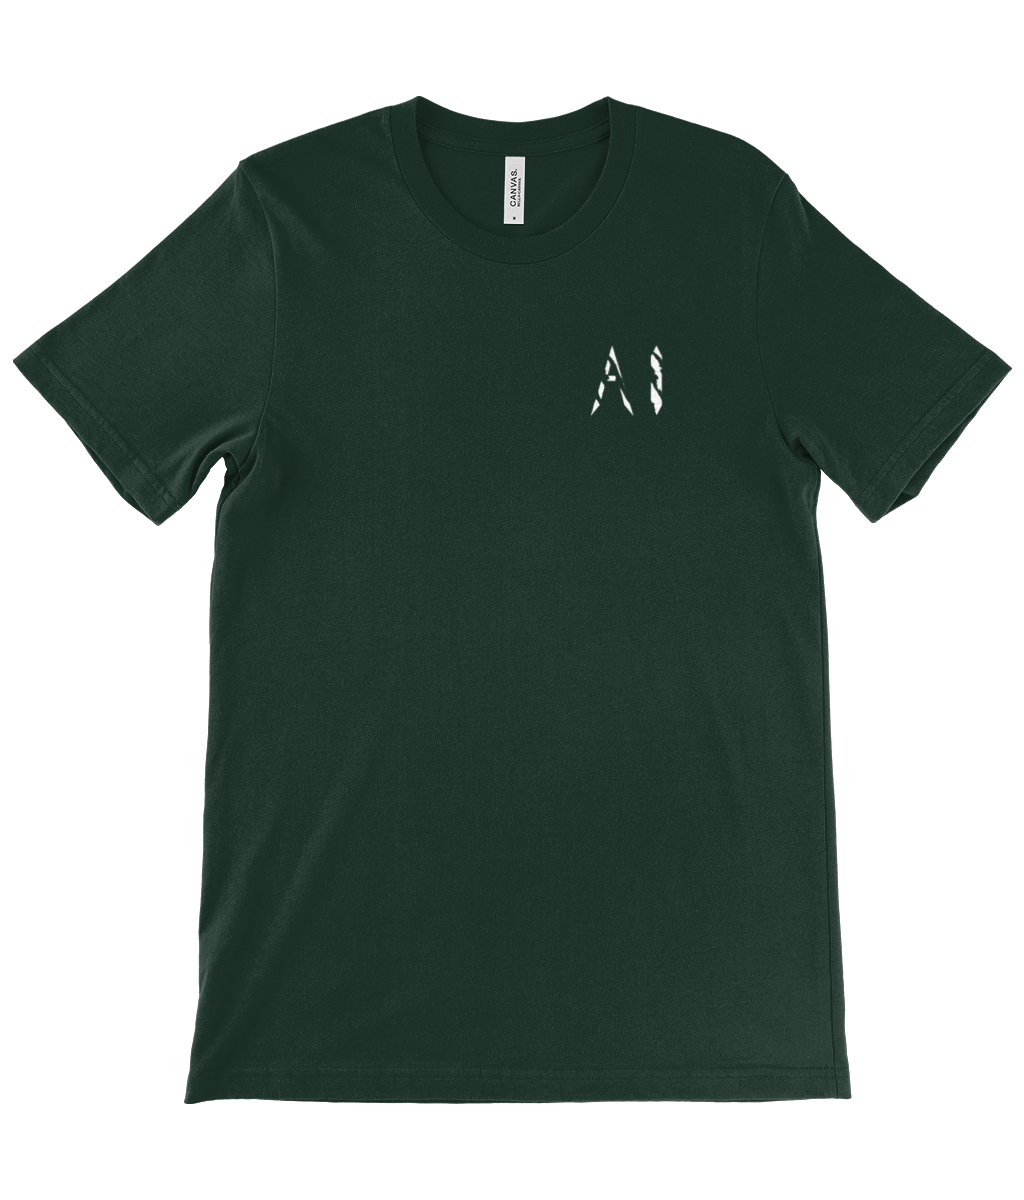 Mens dark green Casual T-Shirt with white logo on the left chest